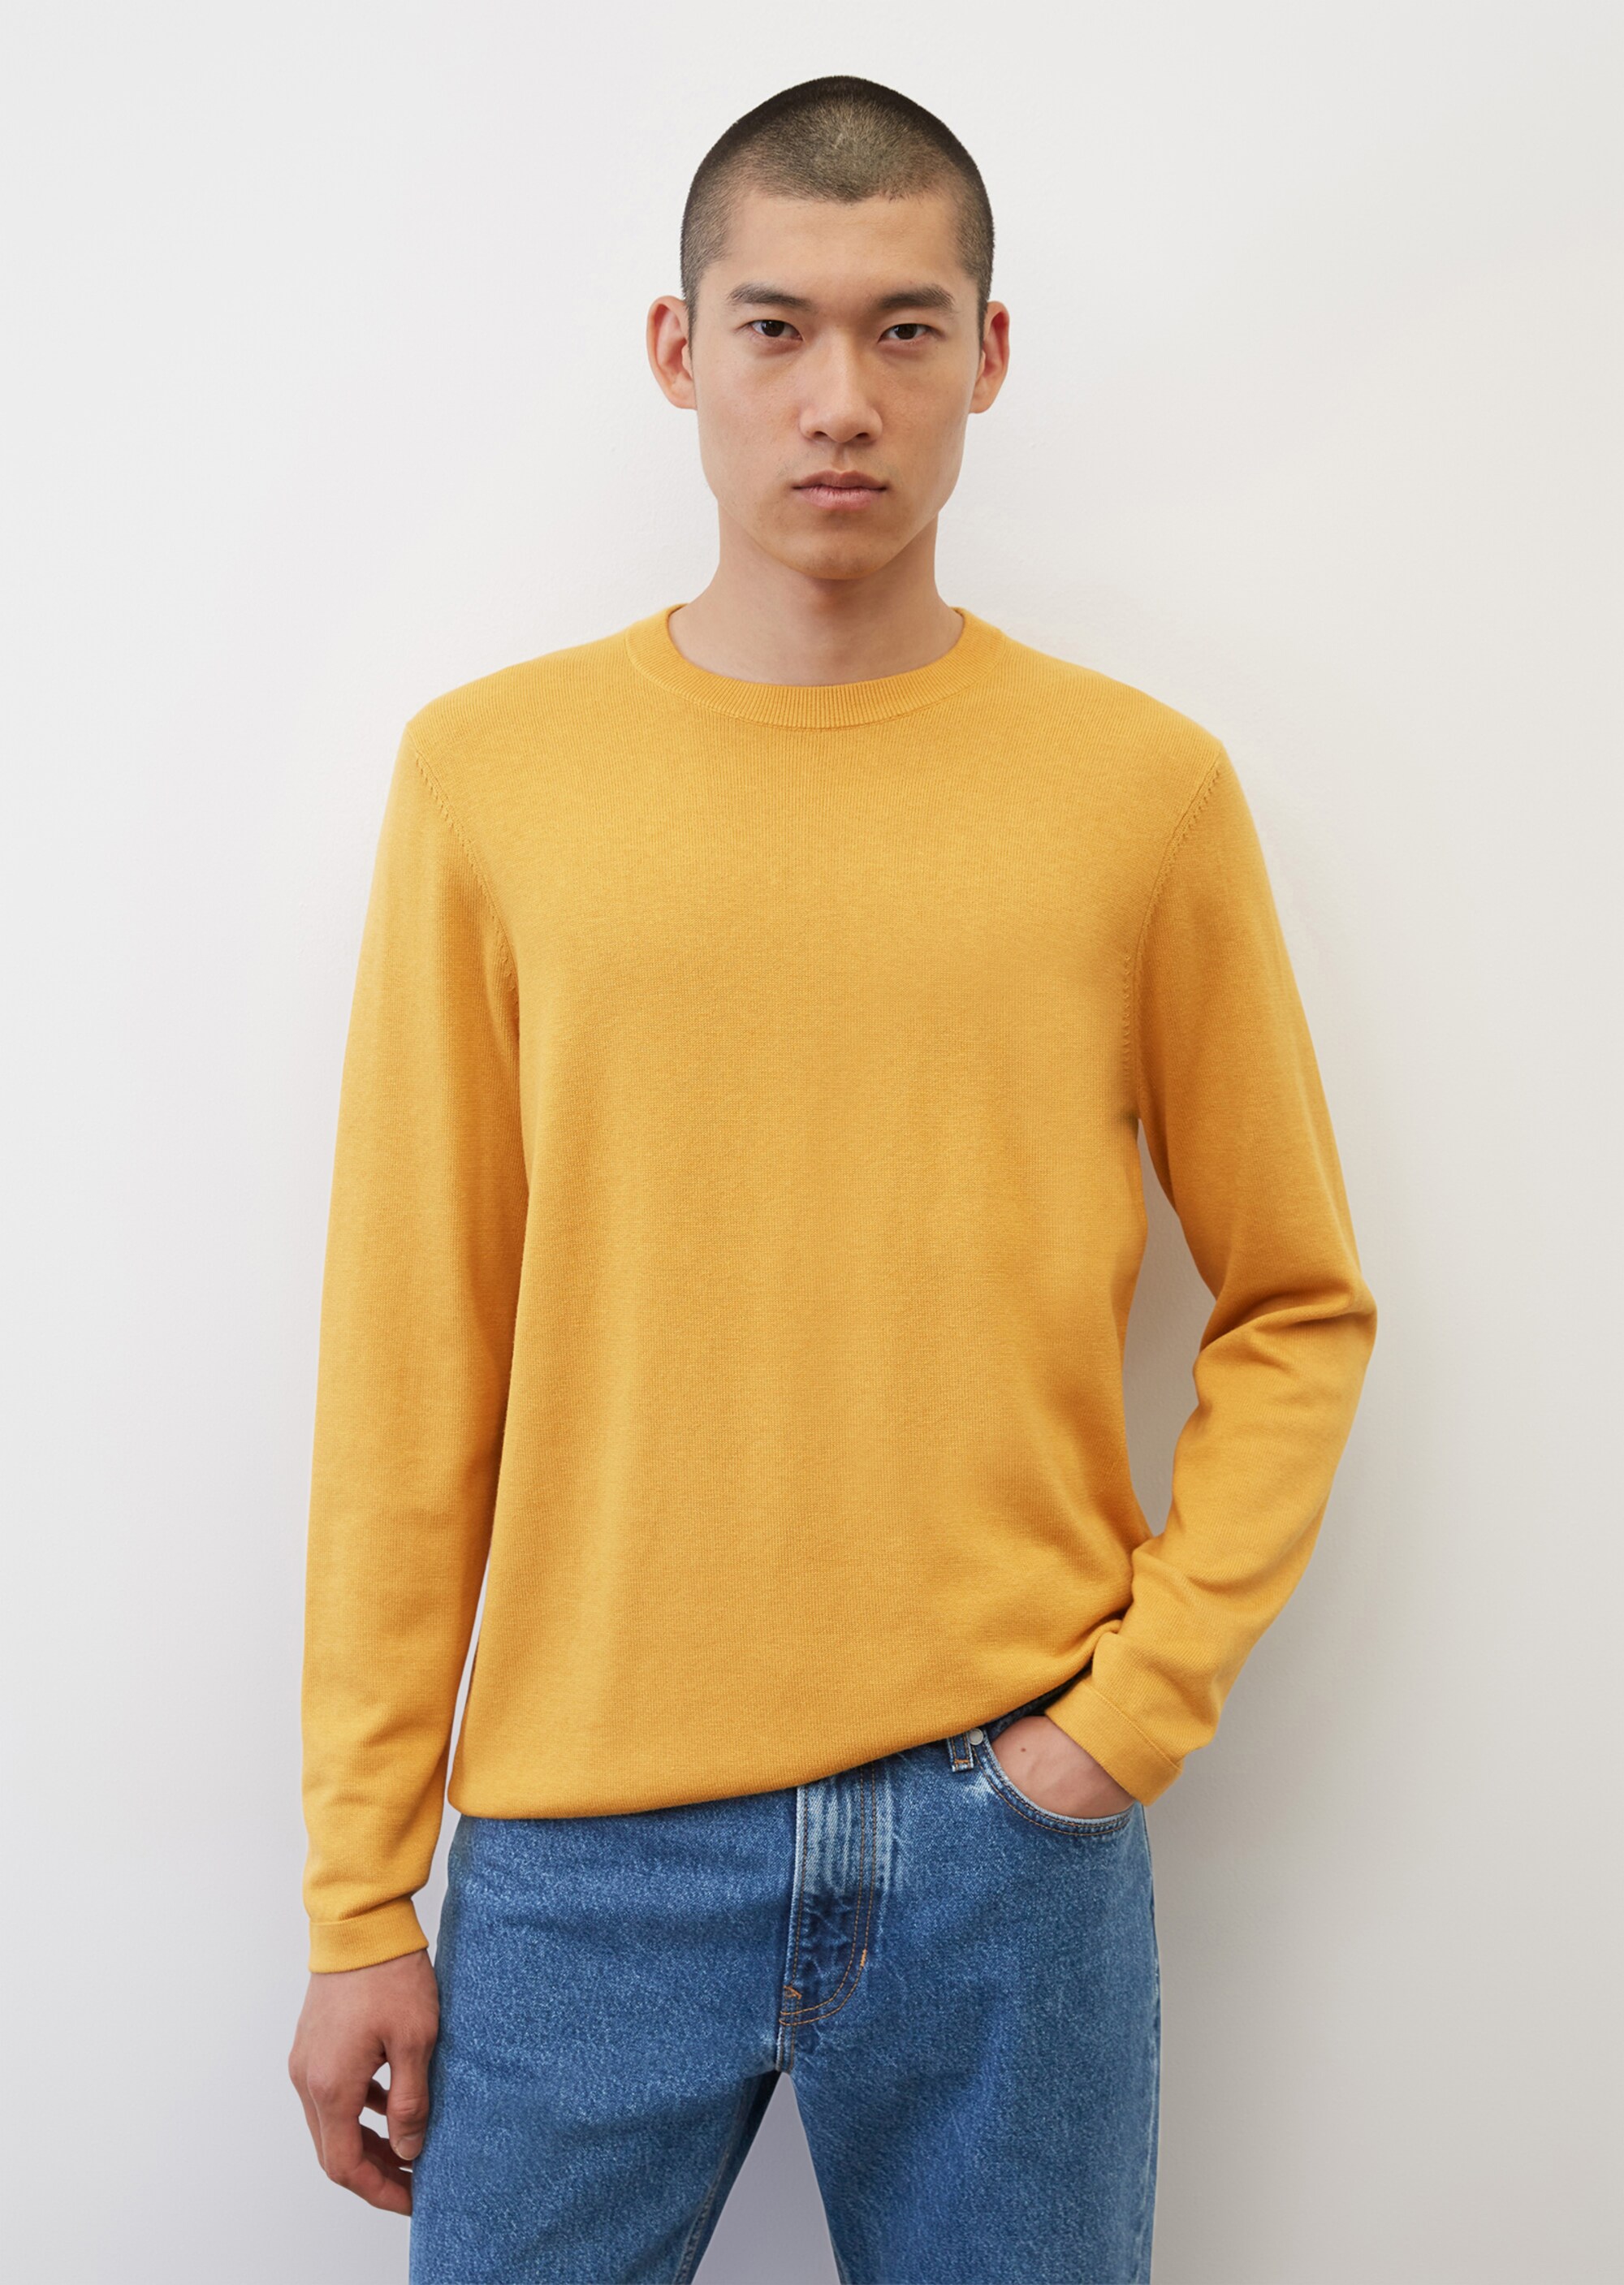 Marc O\u2019Polo Feinstrickpullover zwart-wit gestreept patroon casual uitstraling Mode Sweaters Marc O’Polo 